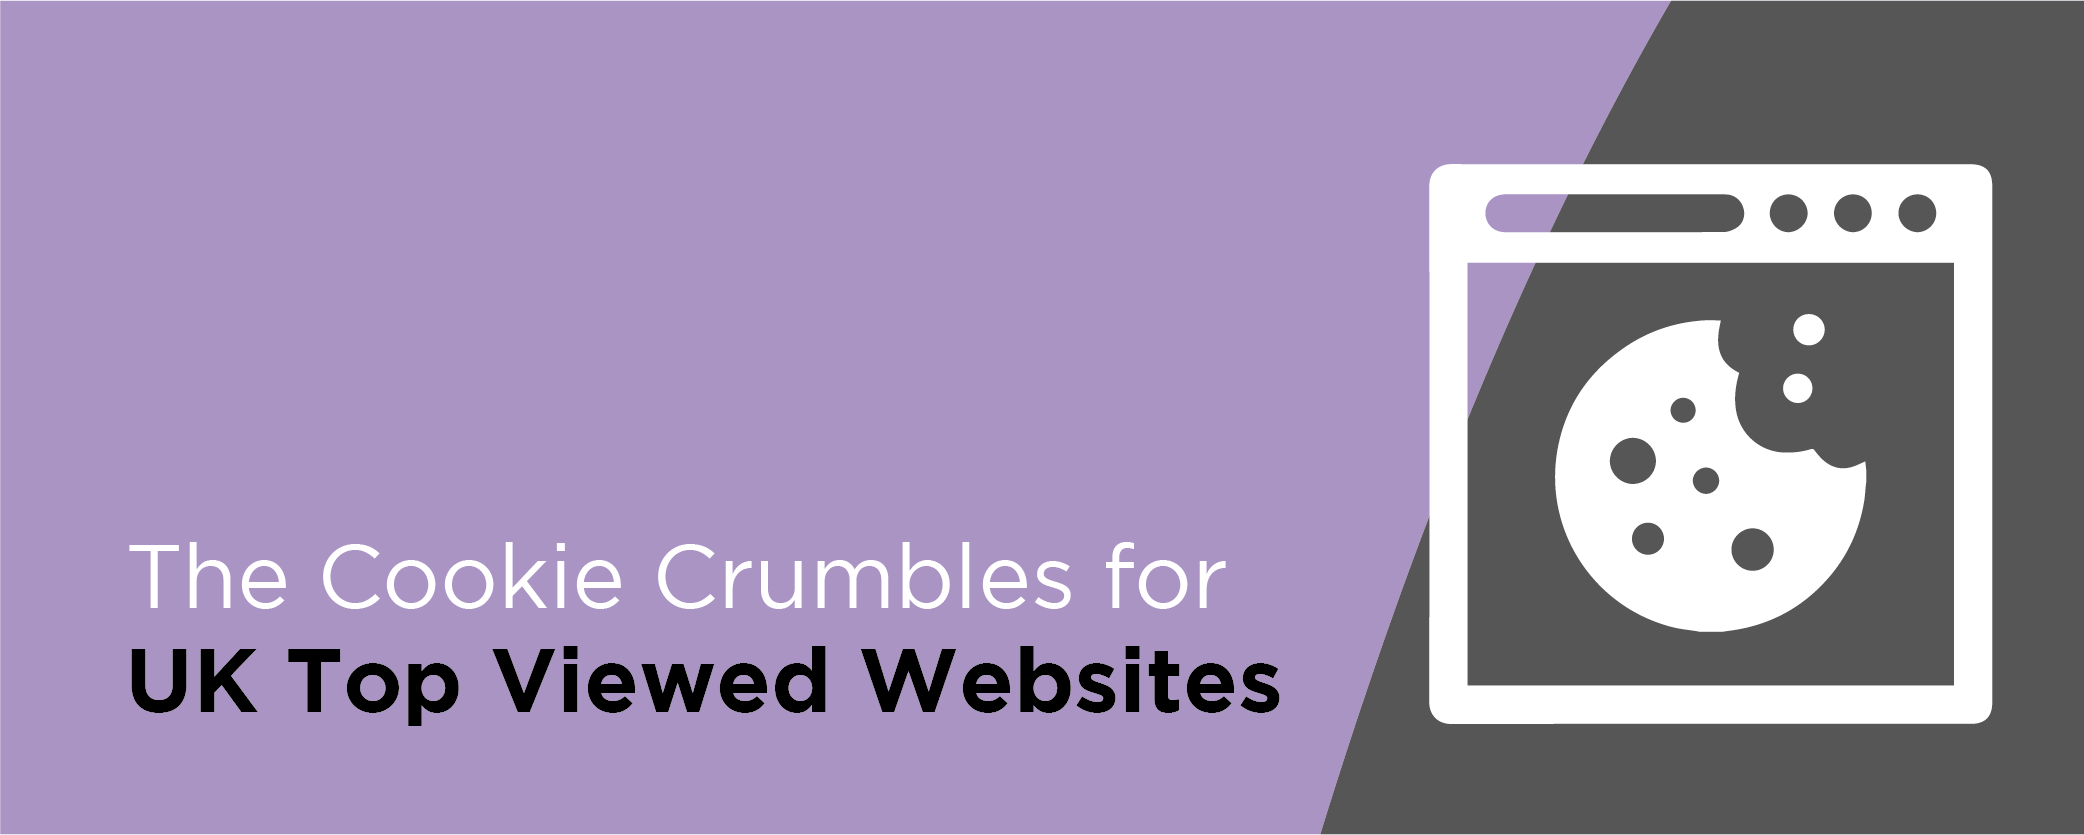 The Cookie Crumbles for UK Top Viewed Websites